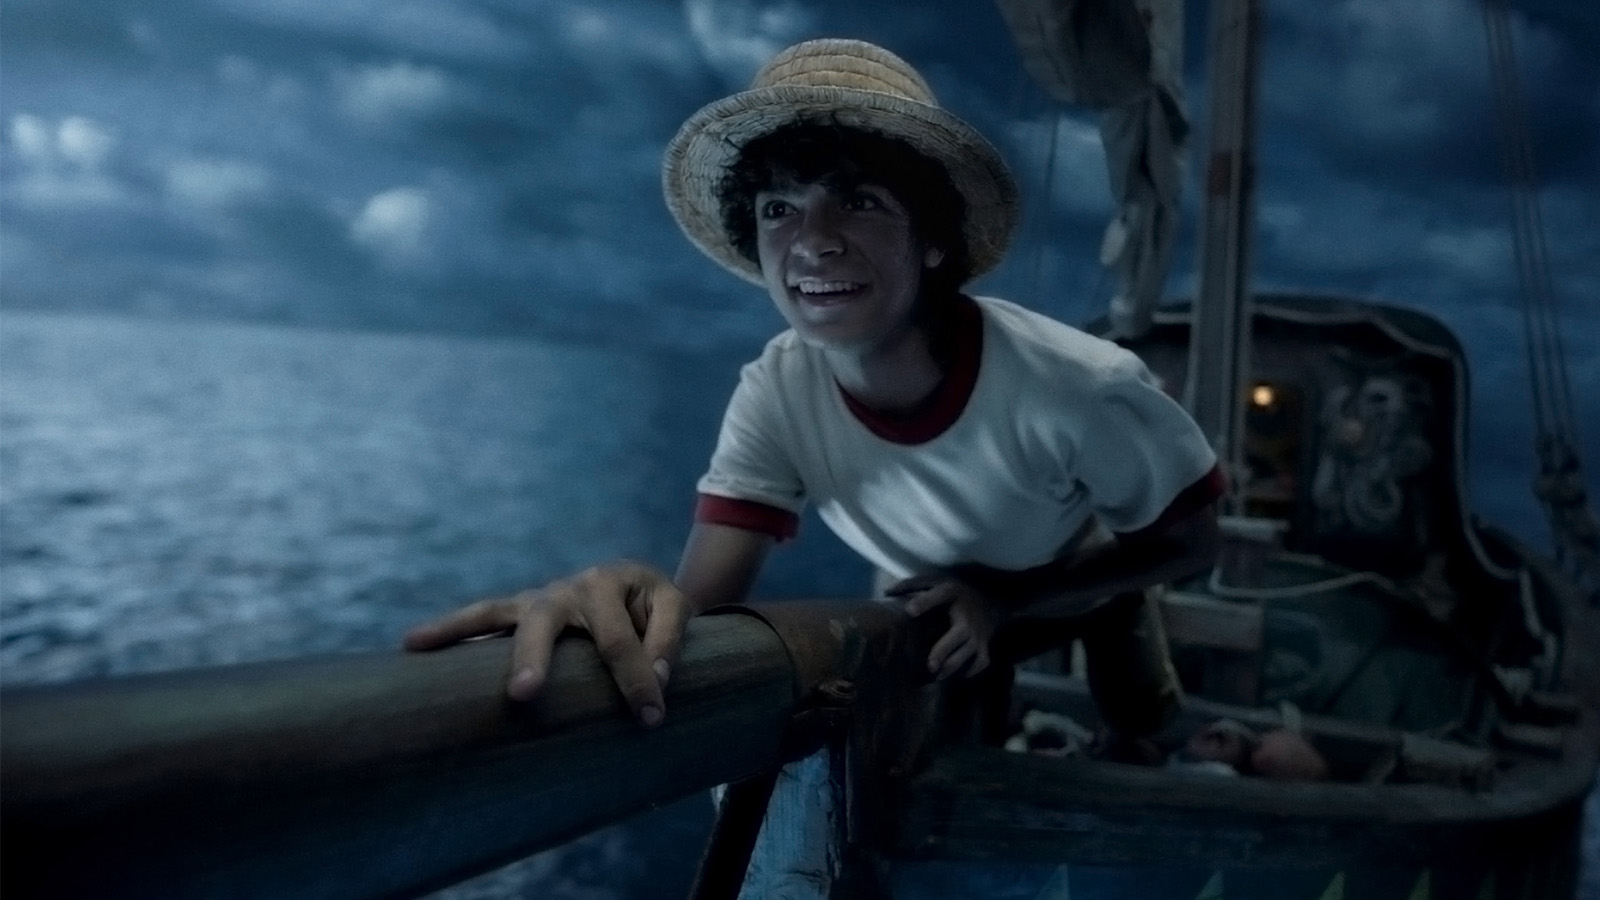 Monkey D. Luffy on the prow of the ship.